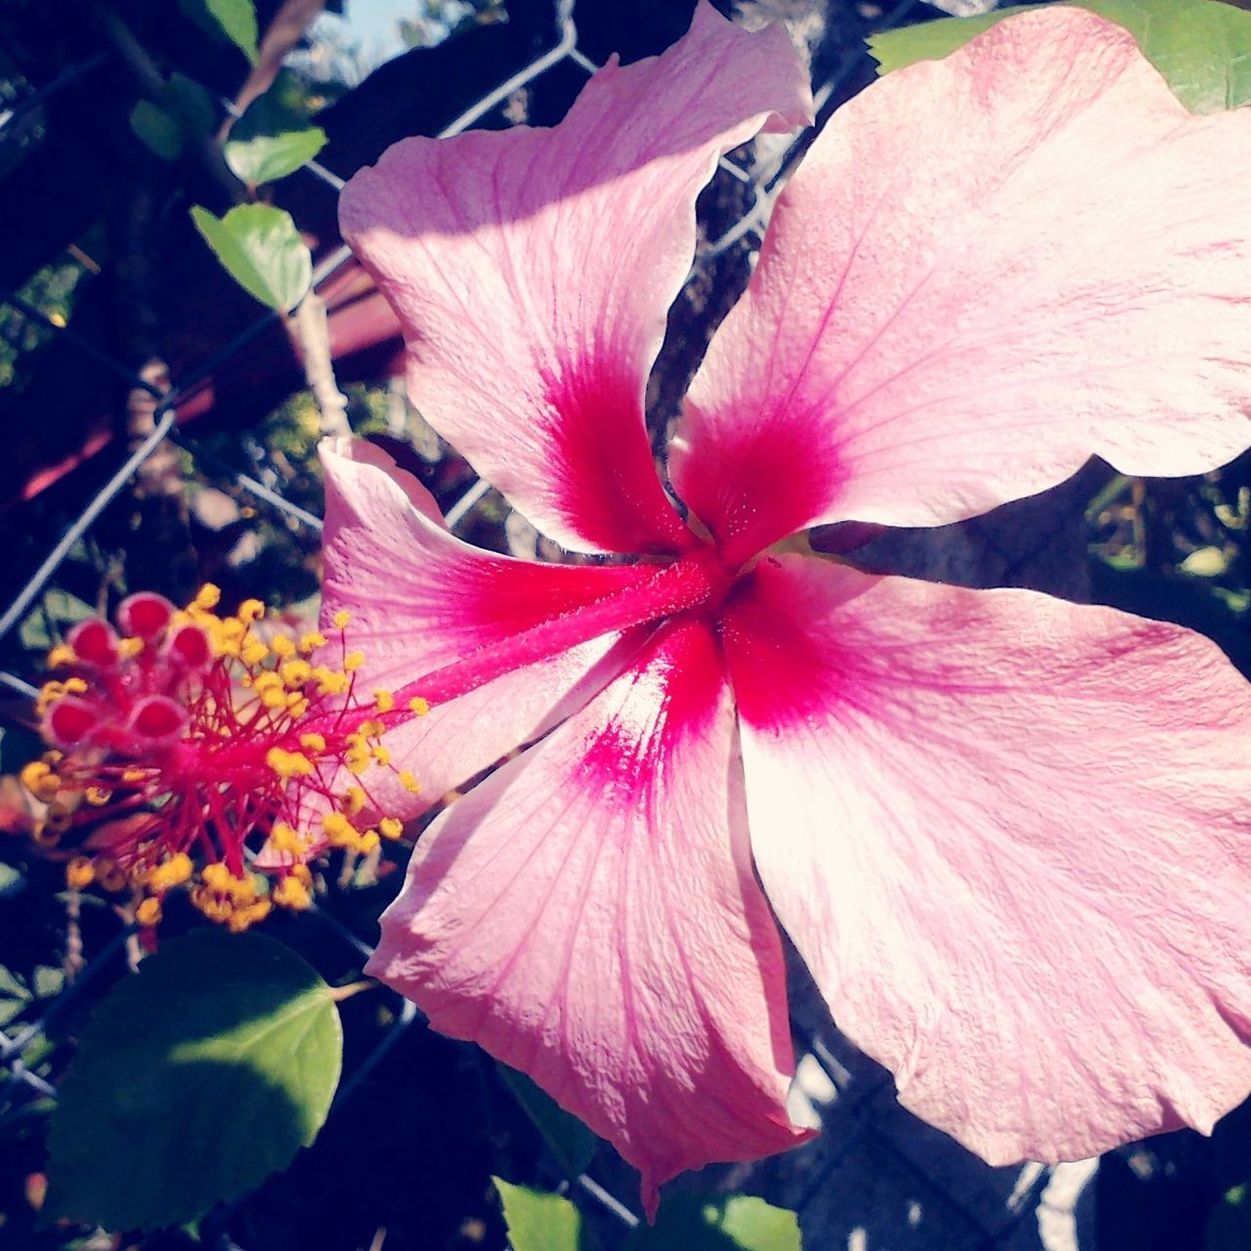 flower, petal, freshness, fragility, flower head, growth, beauty in nature, pink color, close-up, stamen, nature, hibiscus, blooming, pollen, leaf, plant, in bloom, single flower, focus on foreground, red